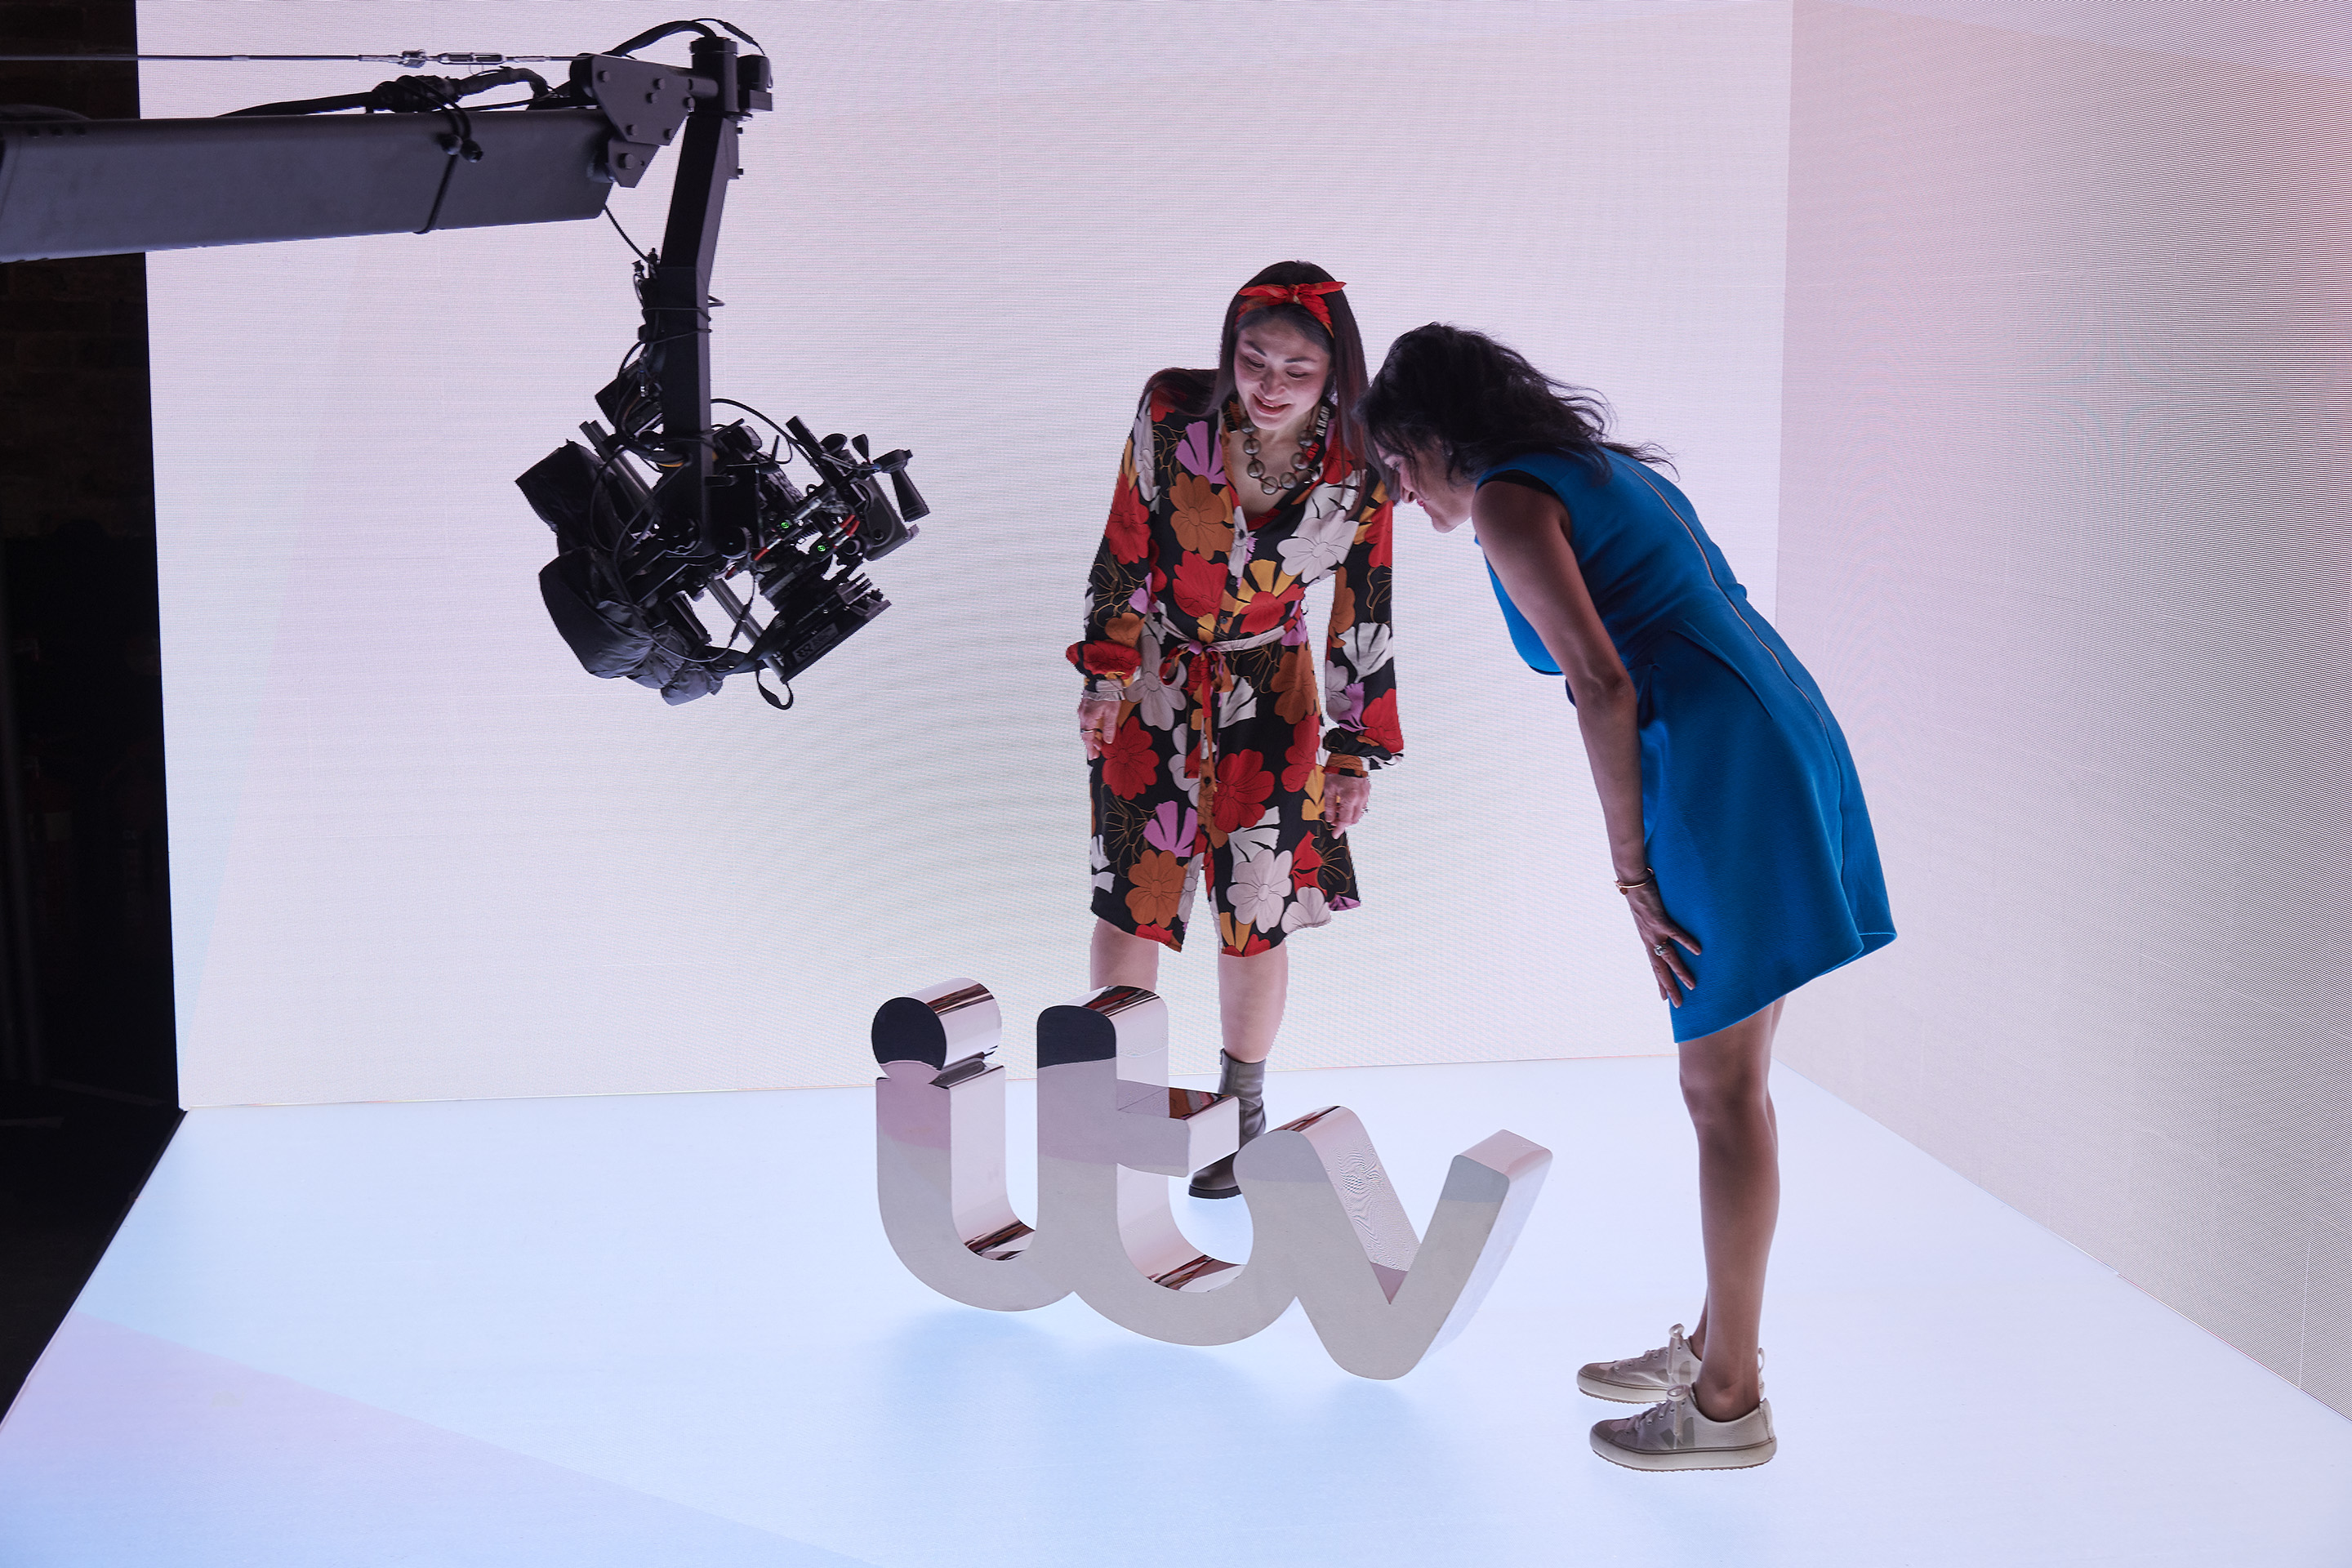 Two women setting up a shot of the mirrored model of the 'itv' logo